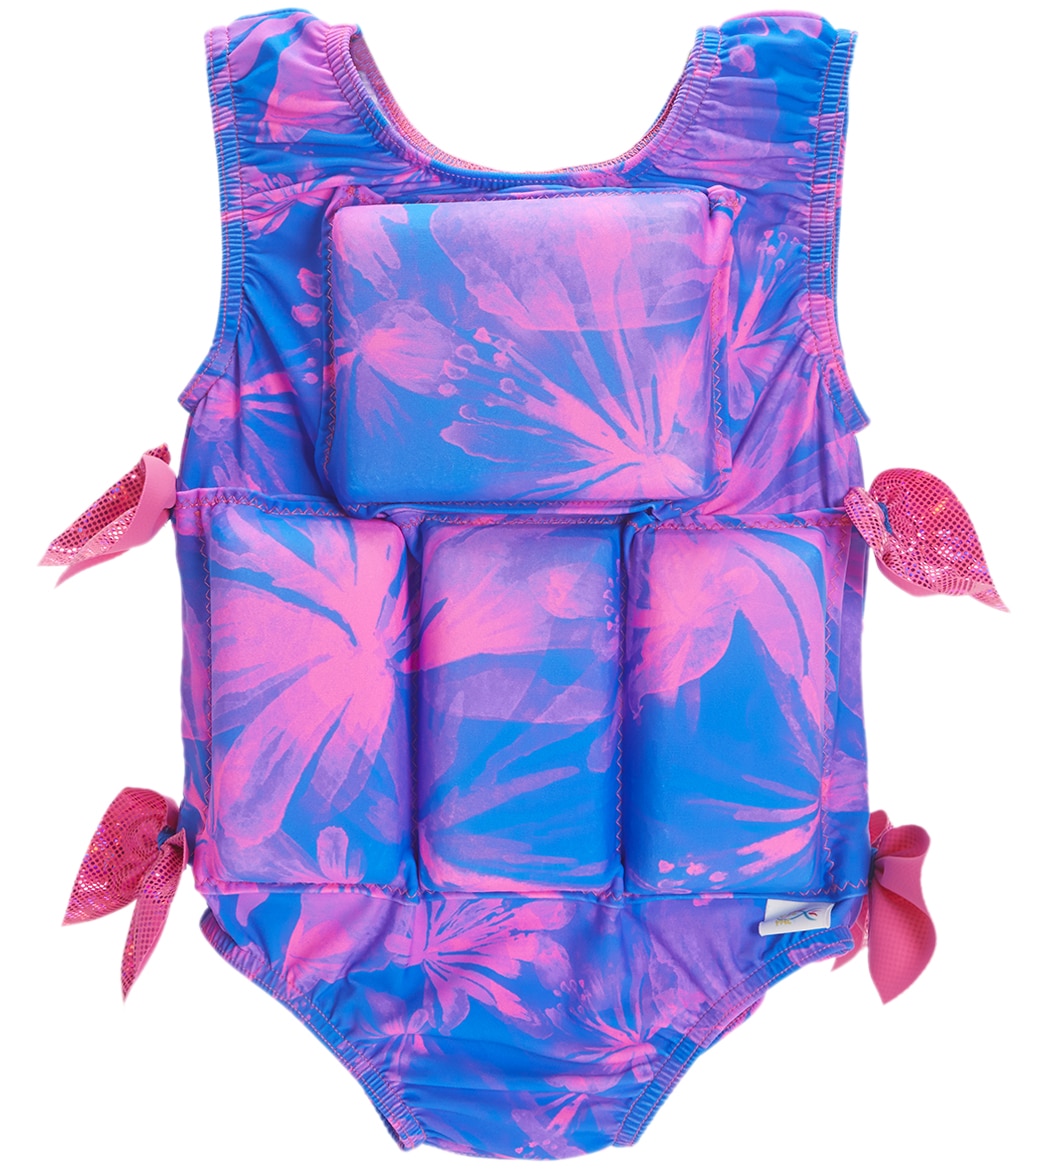 My Pool Pal Girl's Bright Blue And Pink Flotation Swimsuit - Blue/Pink Print Large 50-70 Lbs - Swimoutlet.com